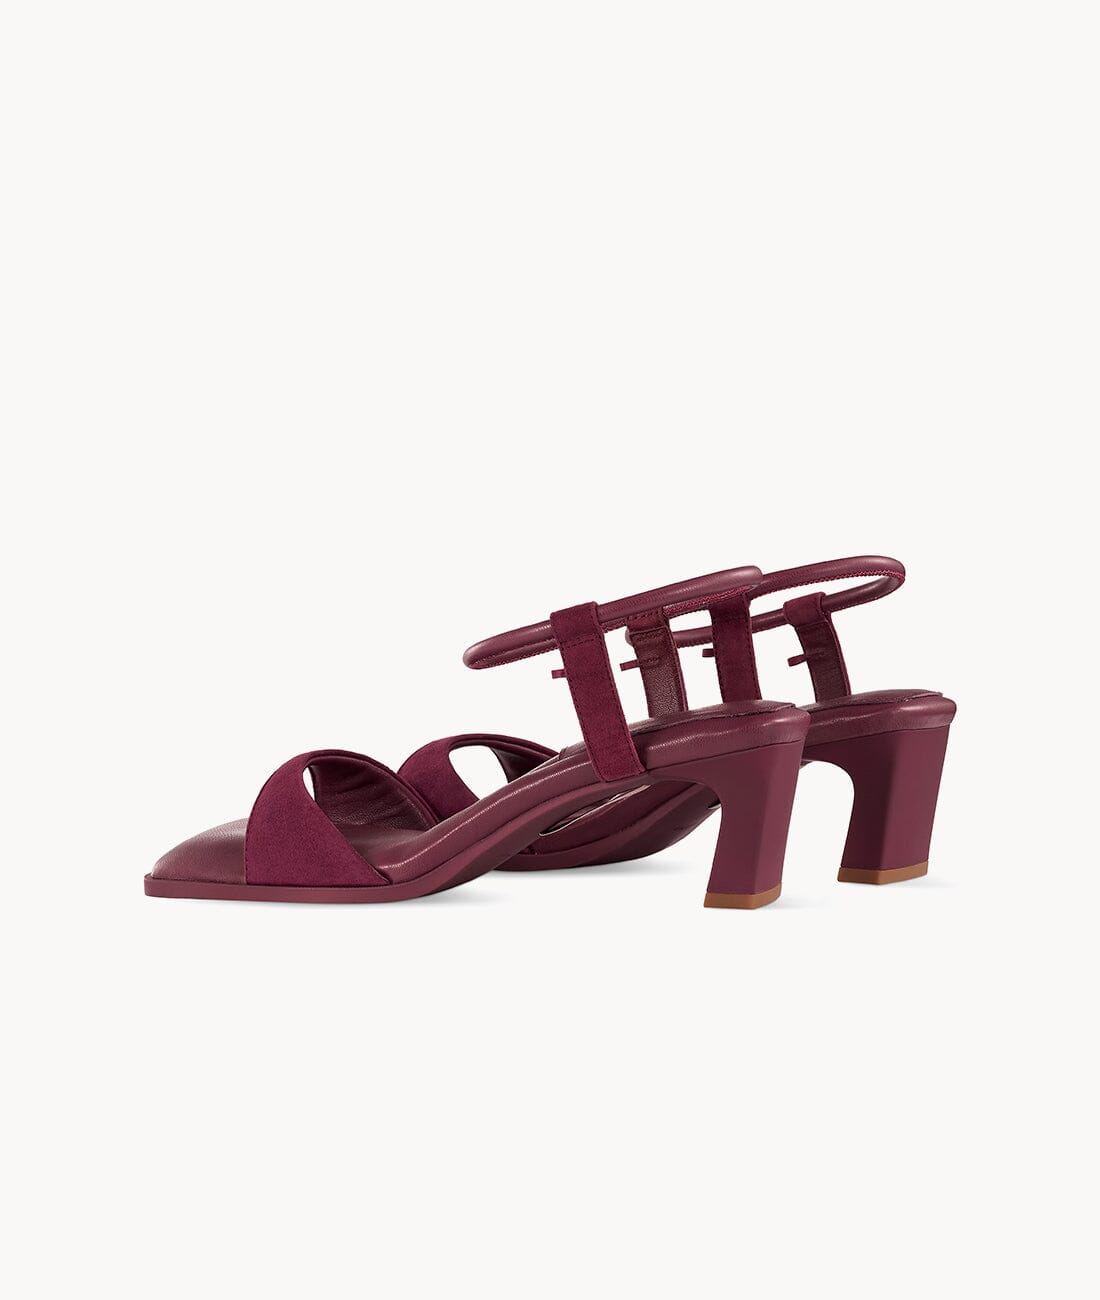 7or9 5cm red Sofas Sandals-Roselle Sandals 7or9 